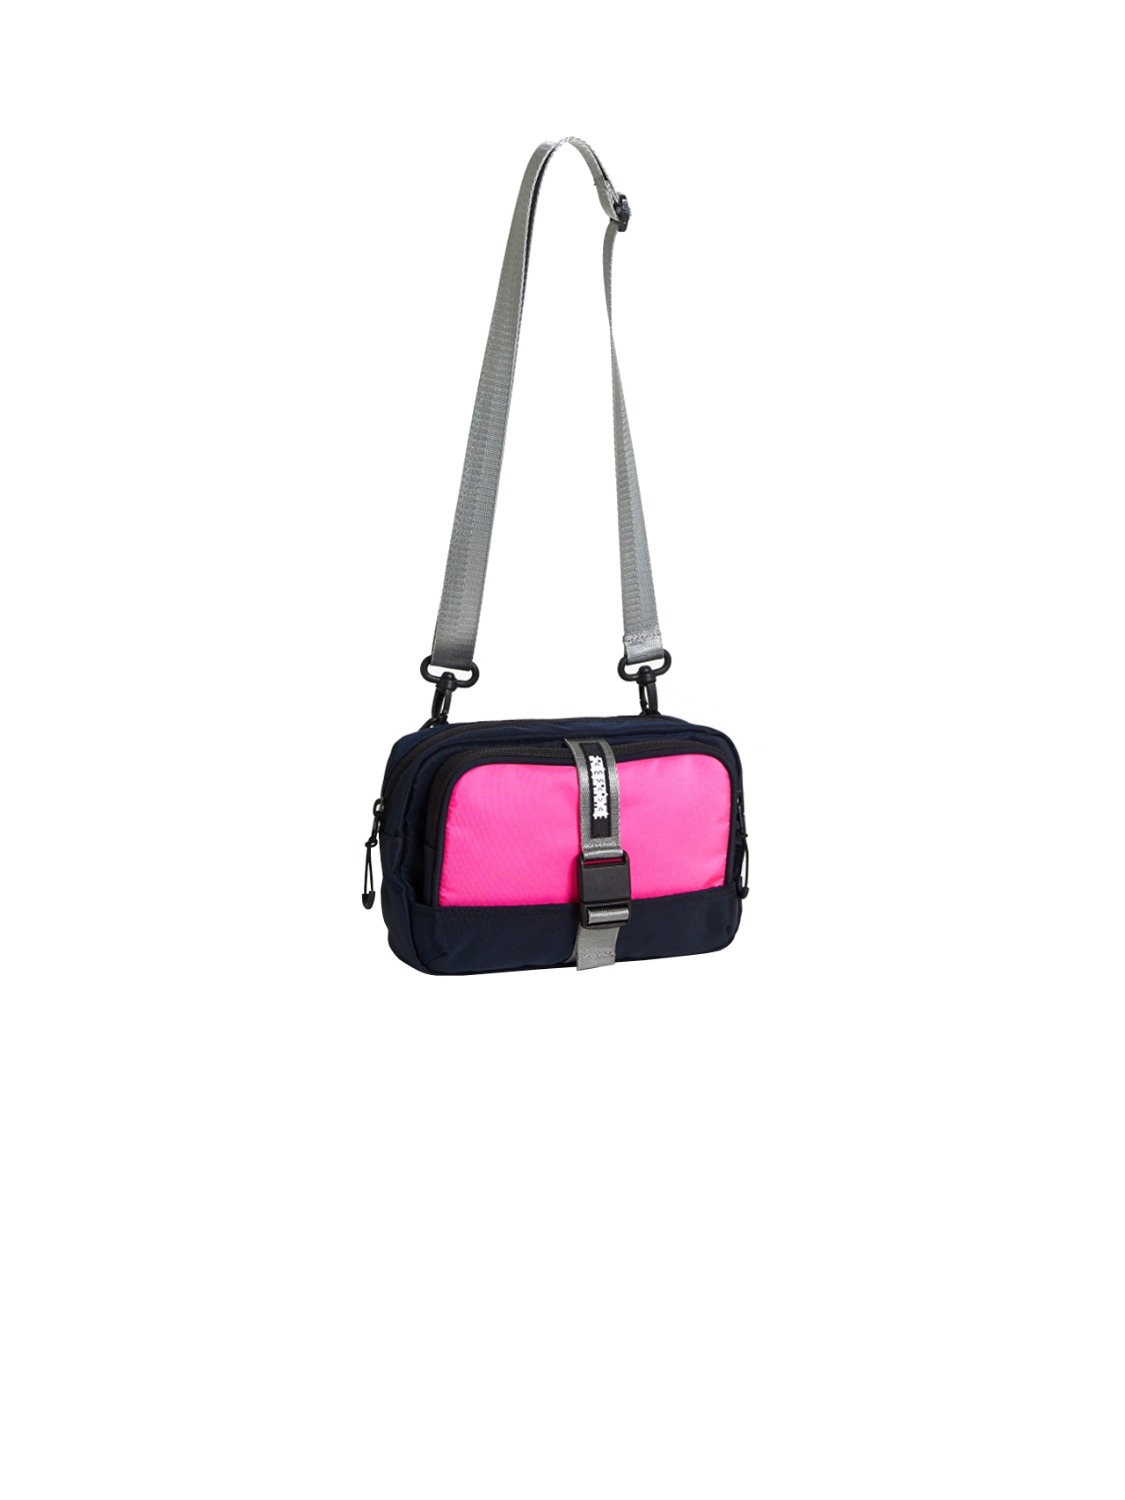 puzzle mini bag navy + pink/navy frame pouch